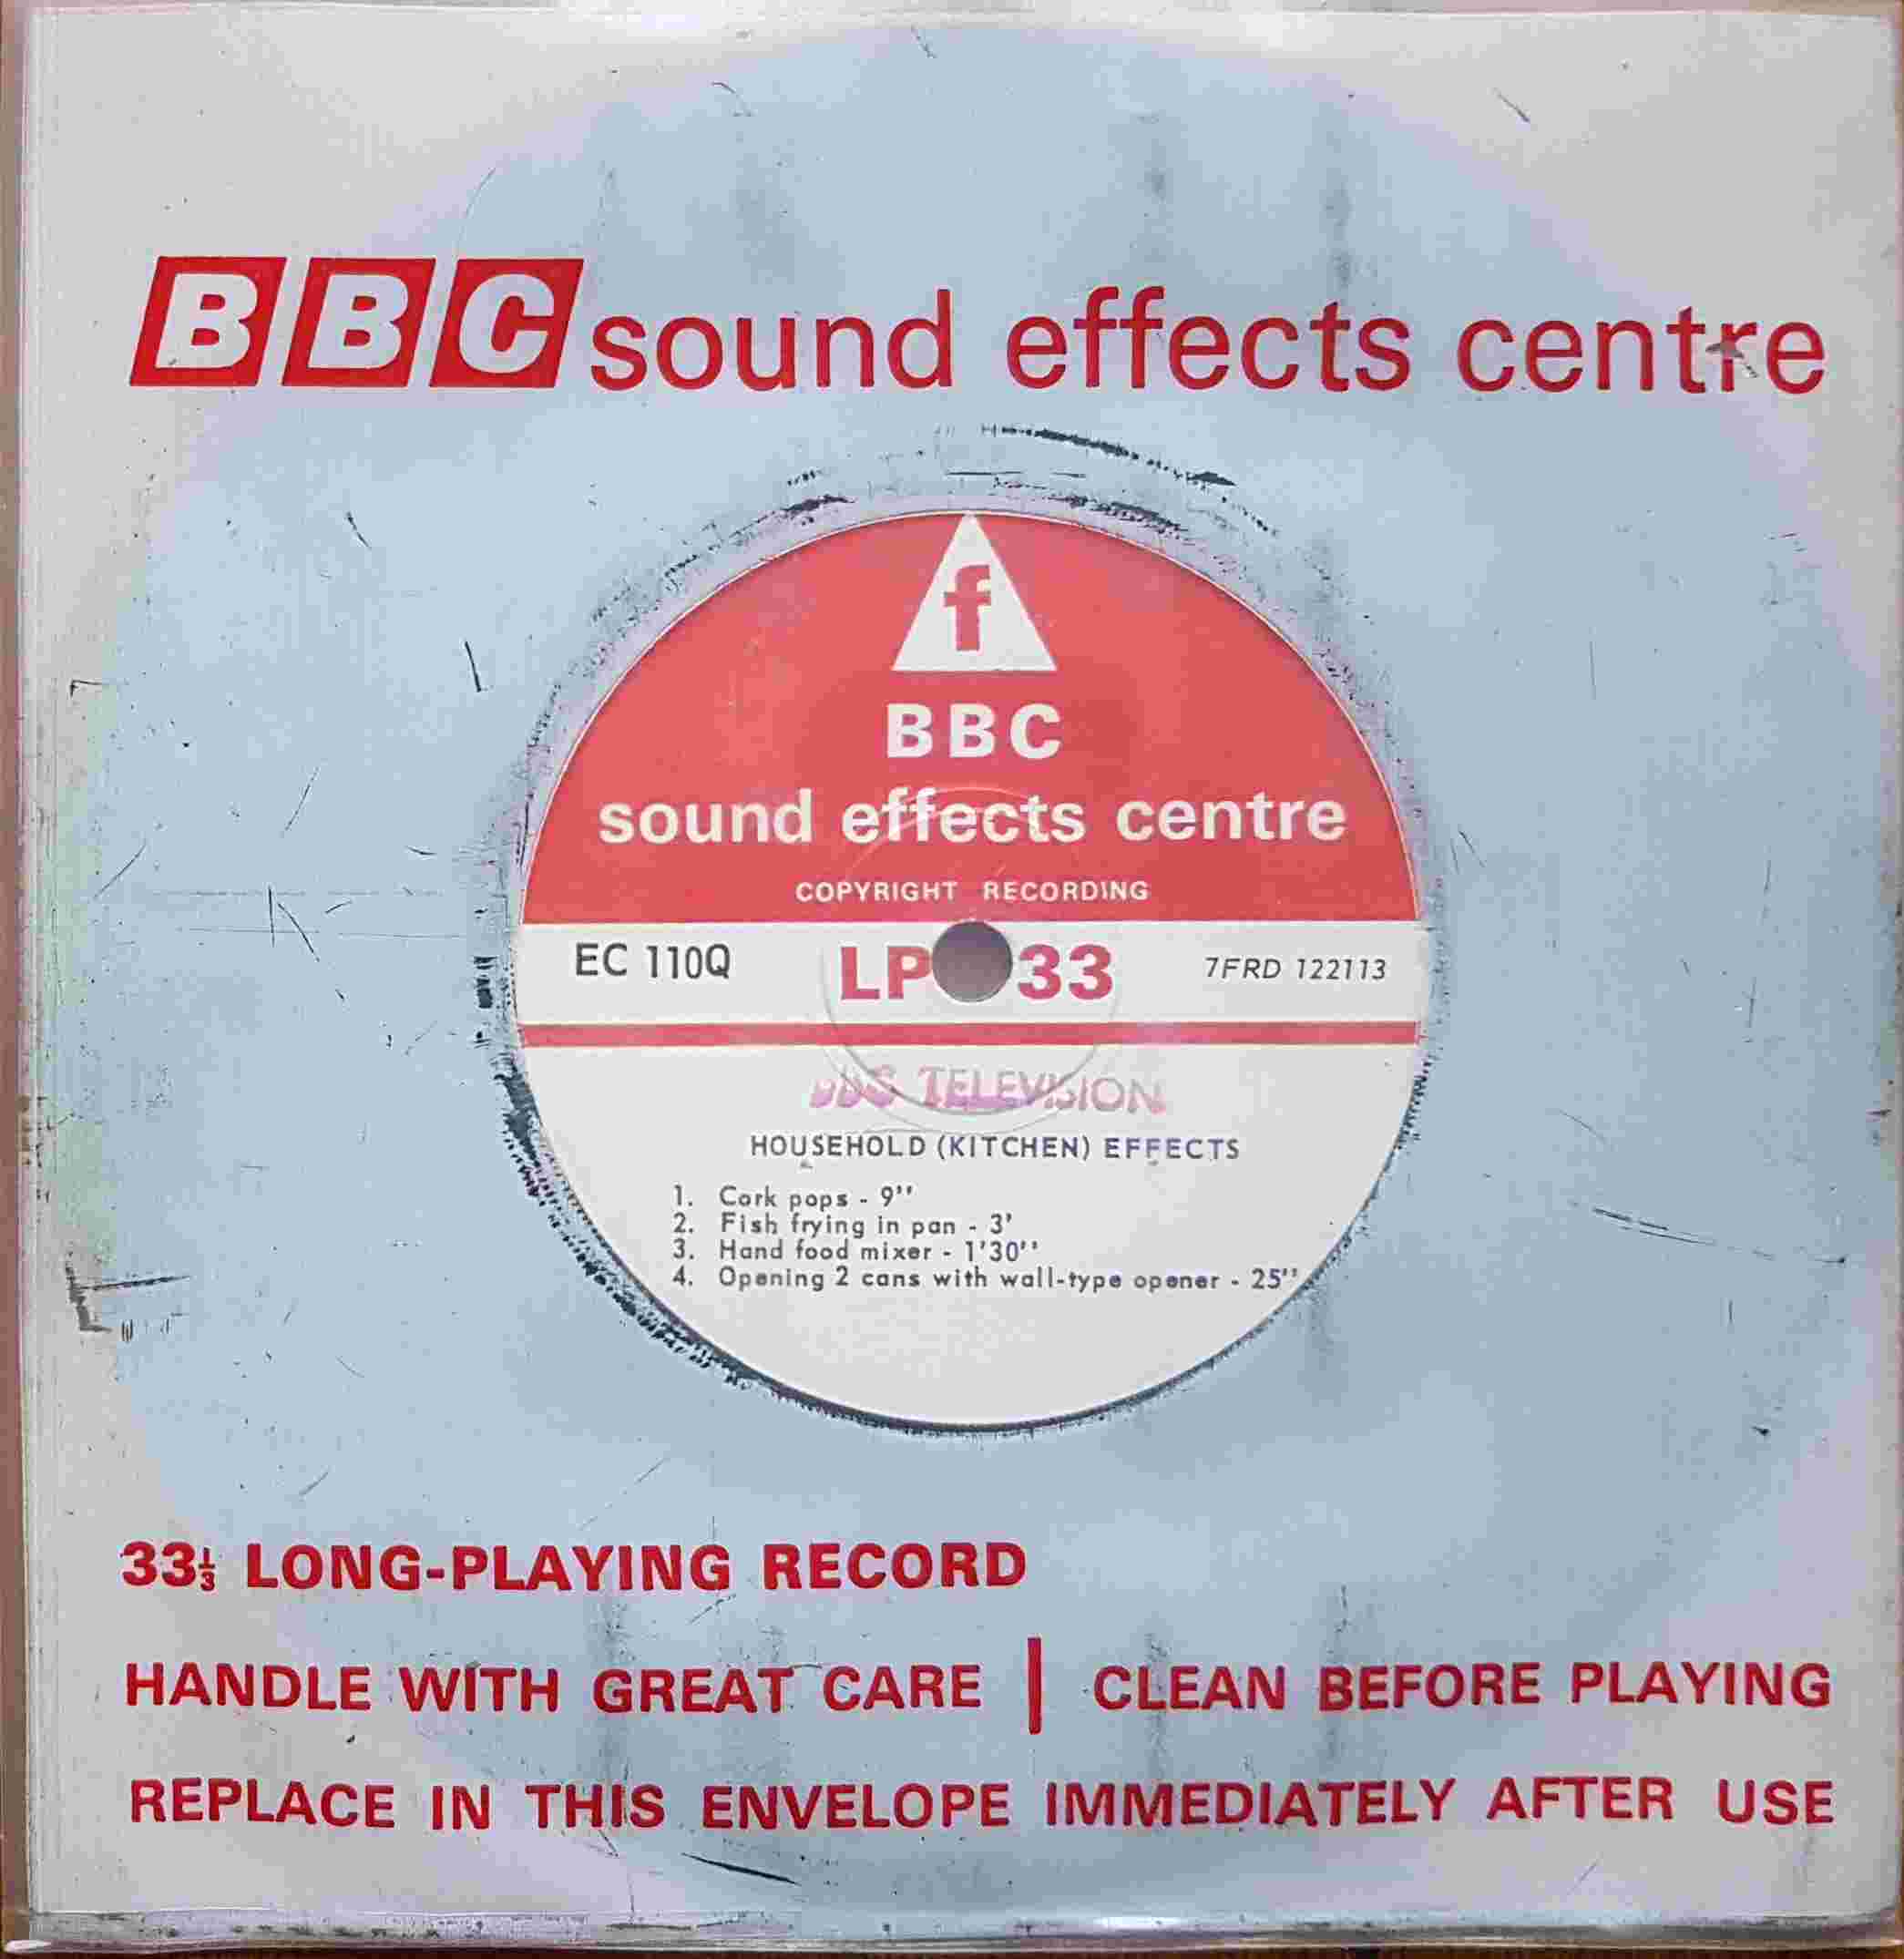 Picture of EC 110Q Household (Kitchen) effects by artist Not registered from the BBC records and Tapes library